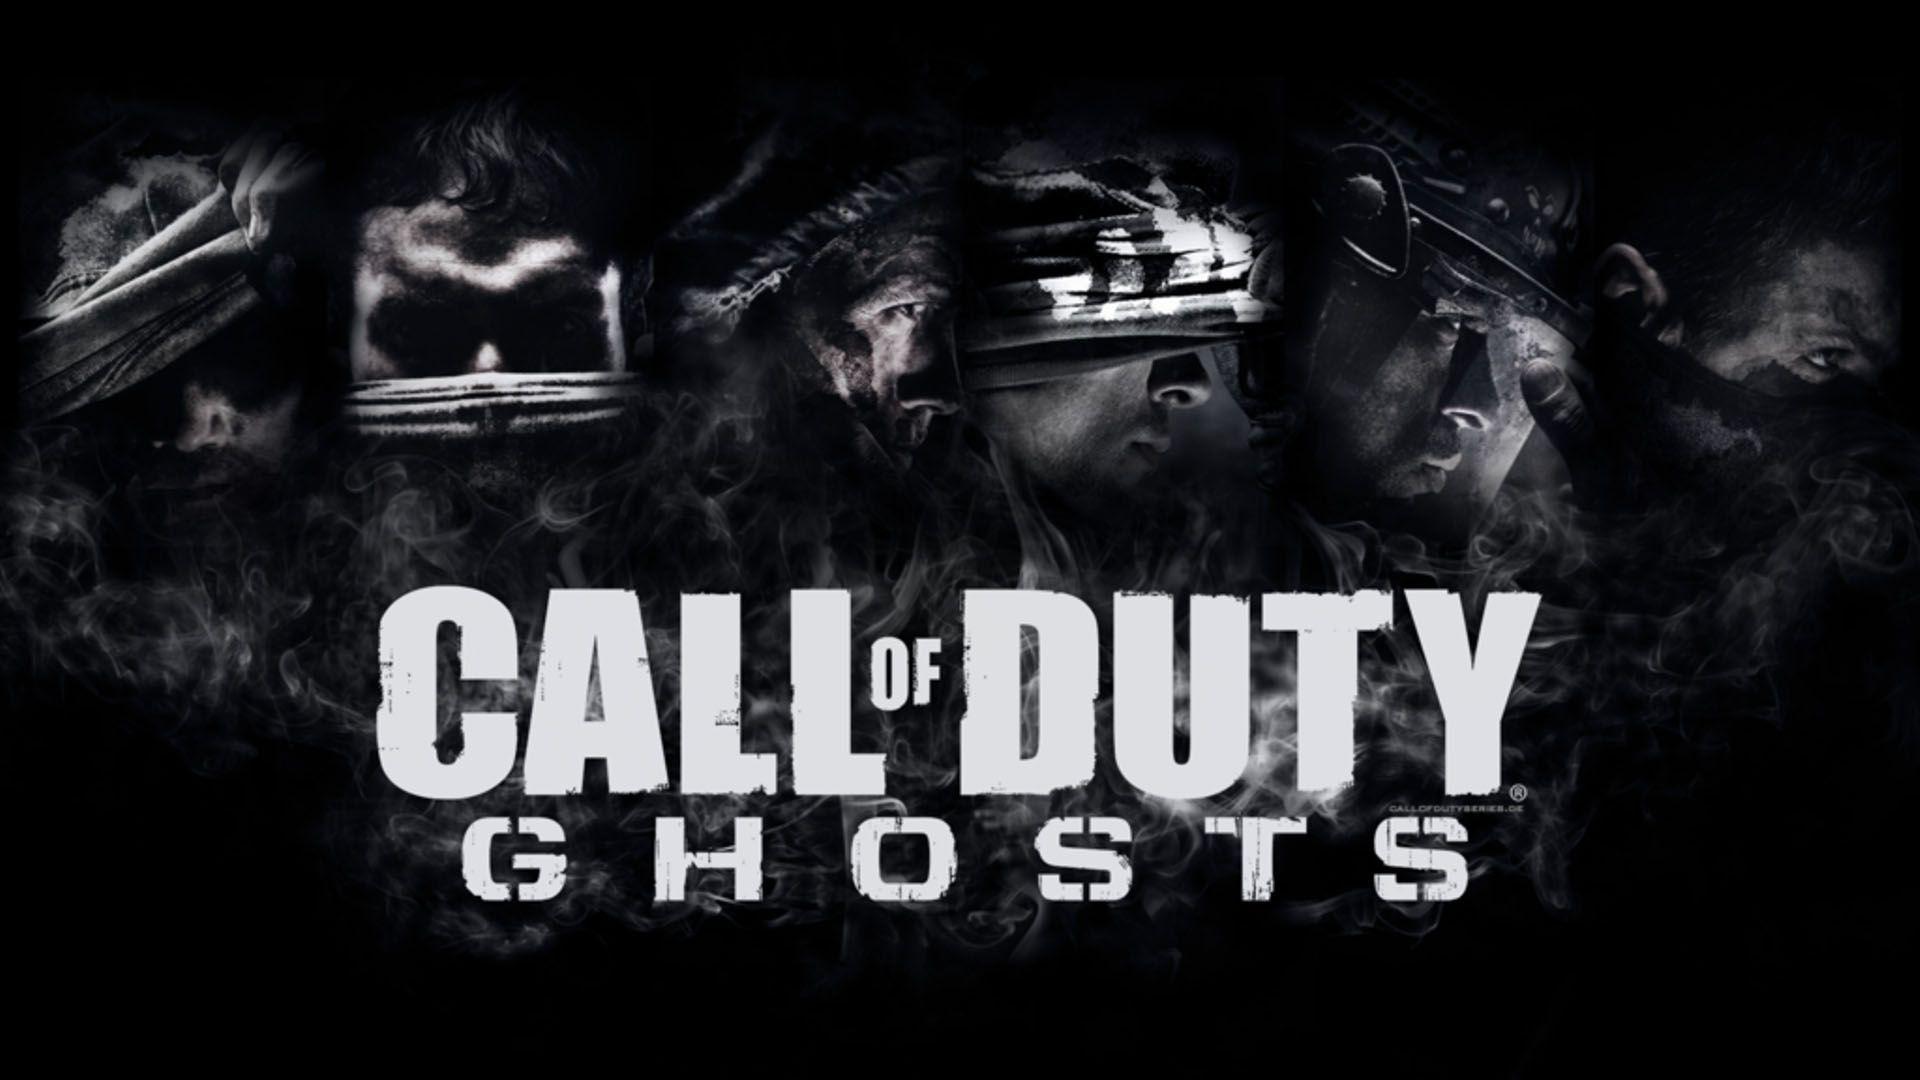 call of duty ghosts wallpaper Google. GAMES YEAAHH